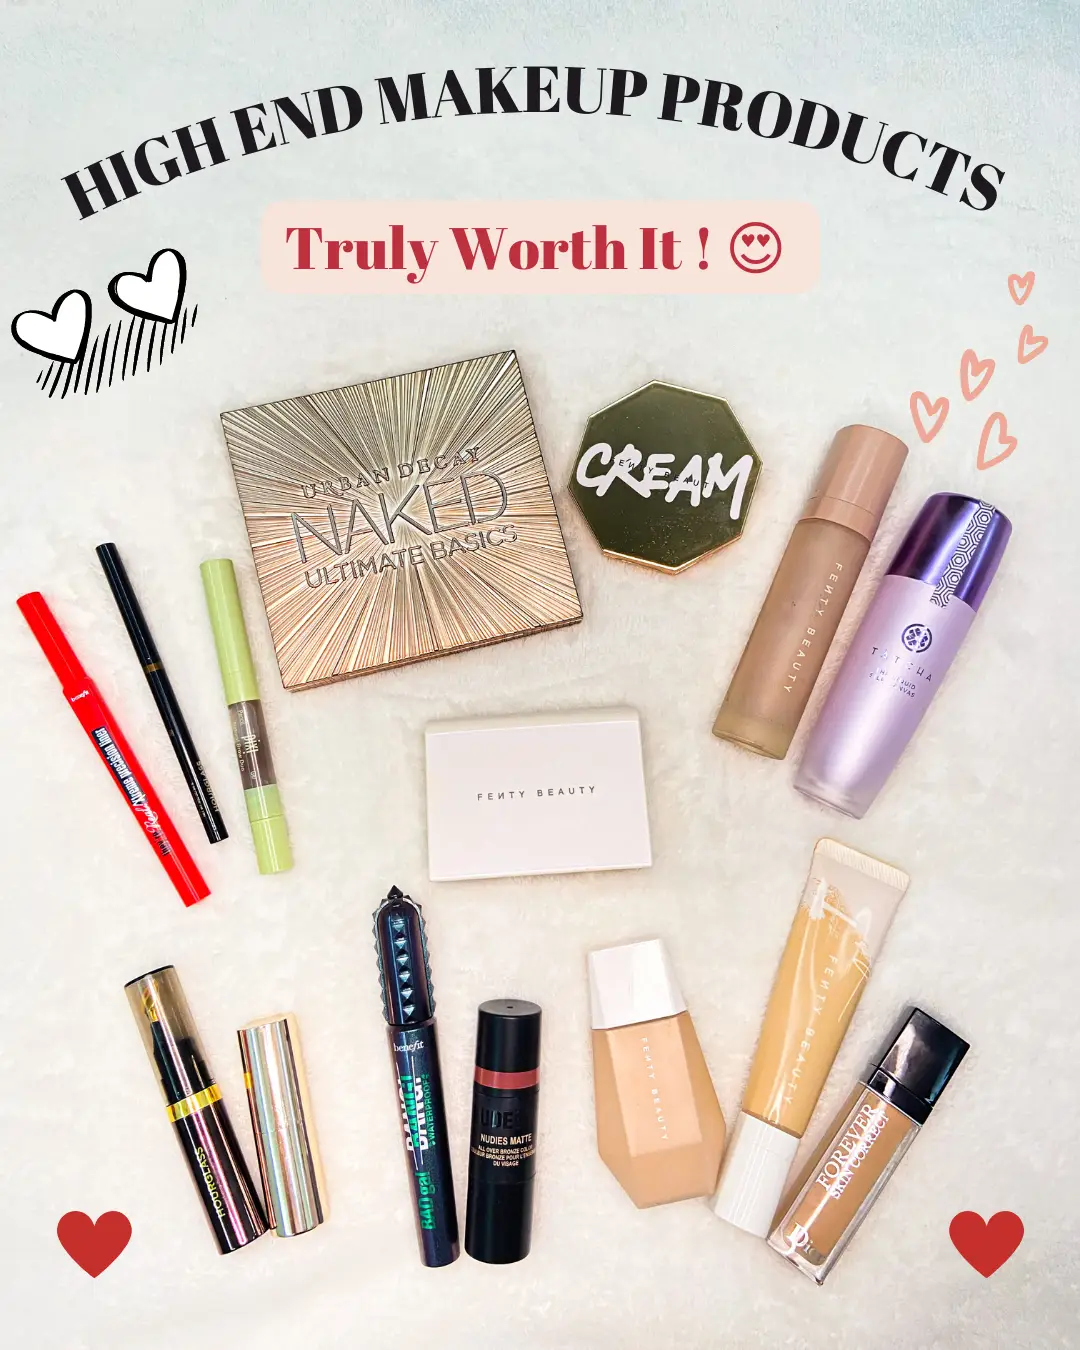 High End Makeup Products Truly Worth